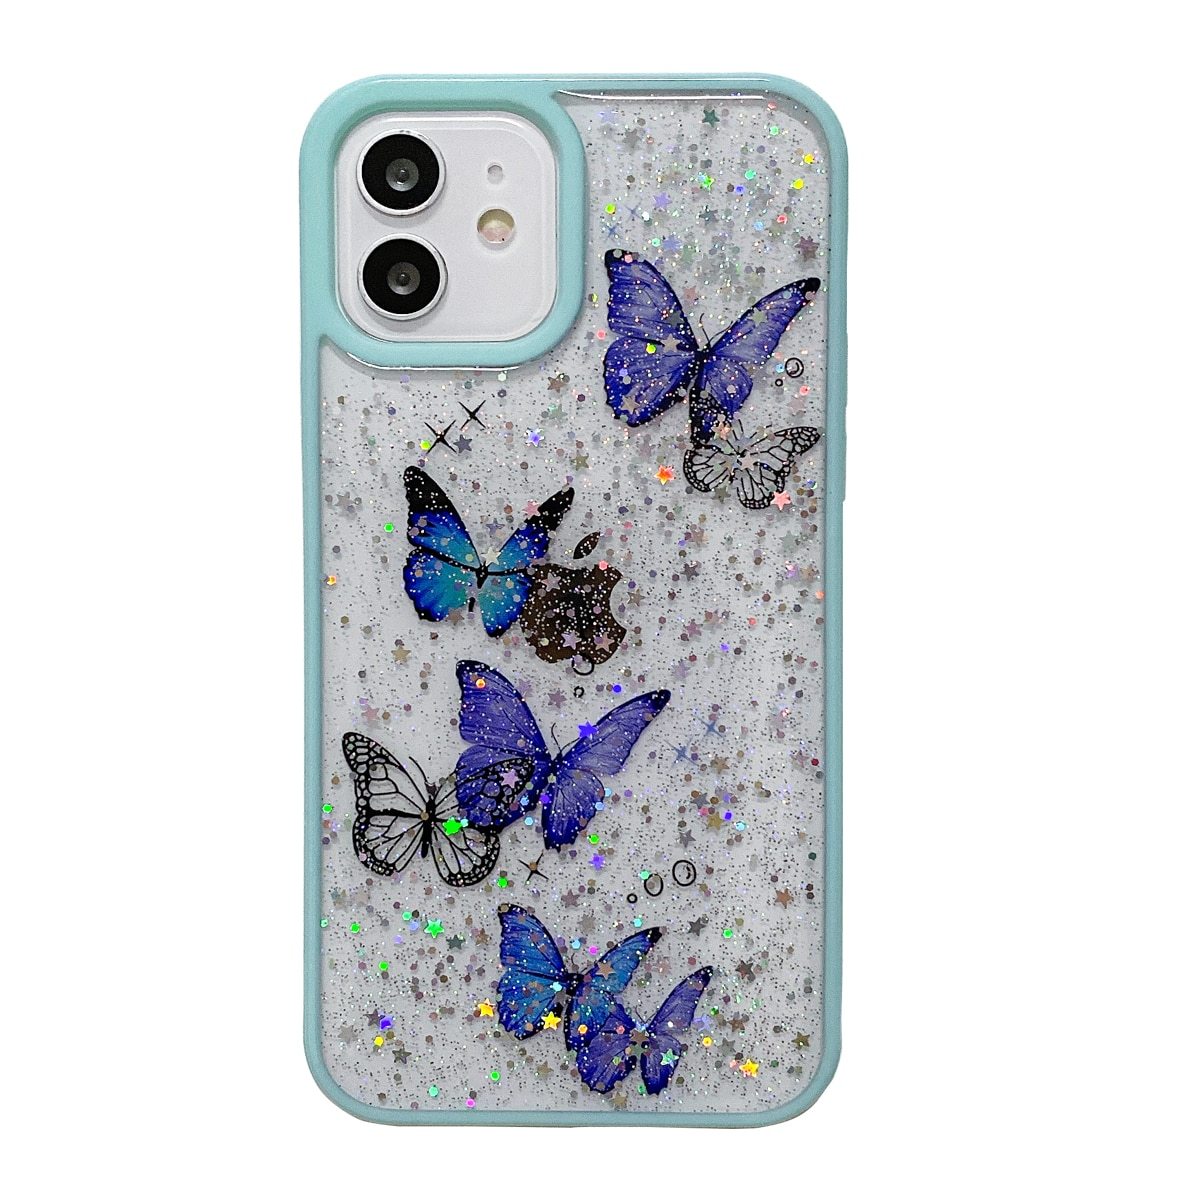 Butterfly Phone Case for iPhone - For Multiple Models | Cute Glitter Phone Case